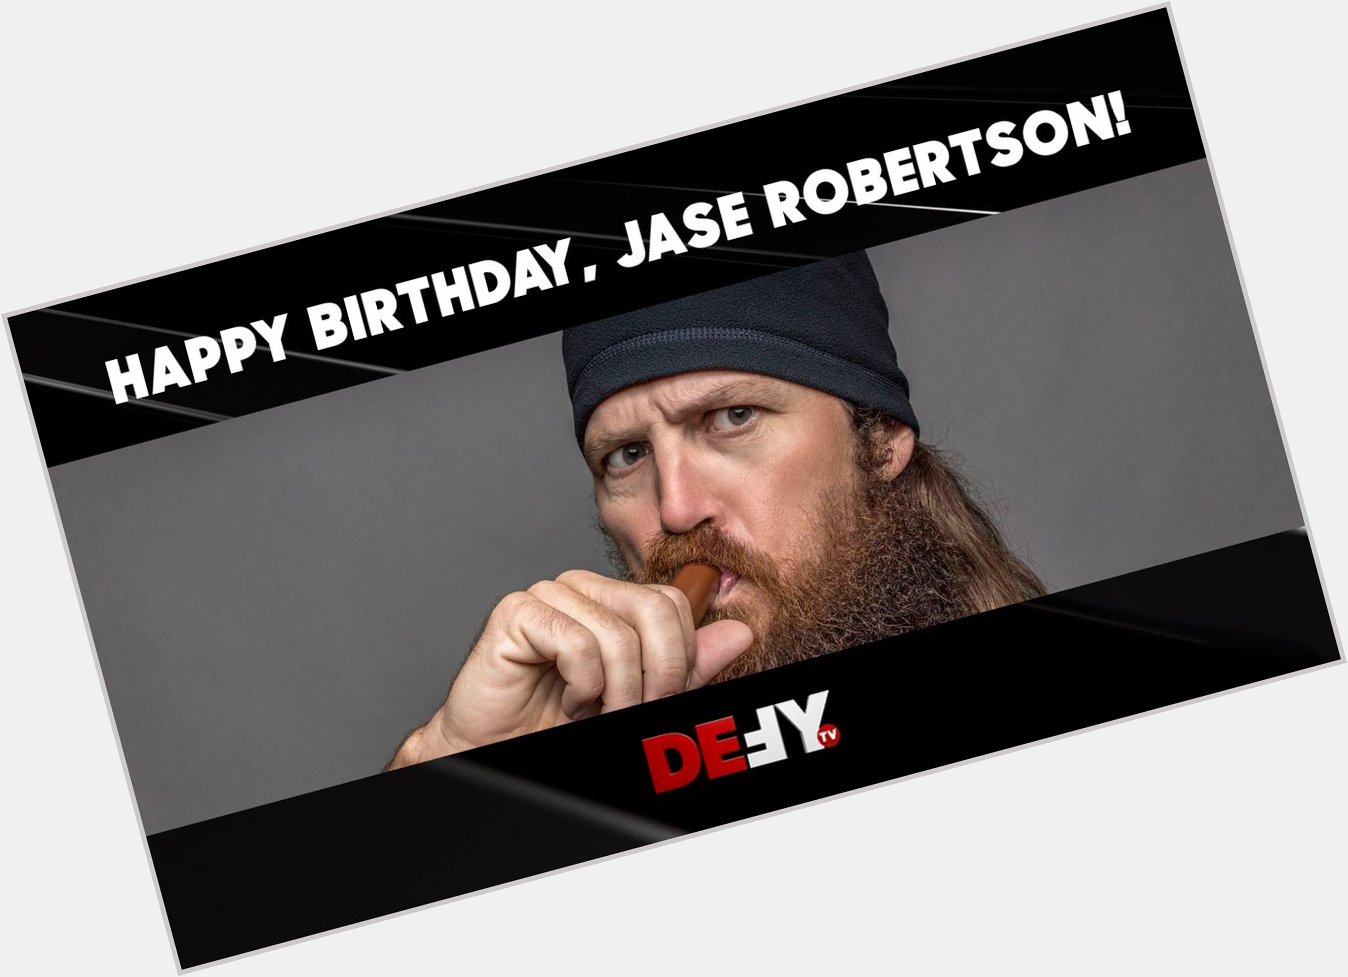 Calling all the duck hunters and fans, help us wish Jase Robertson a happy birthday today! 